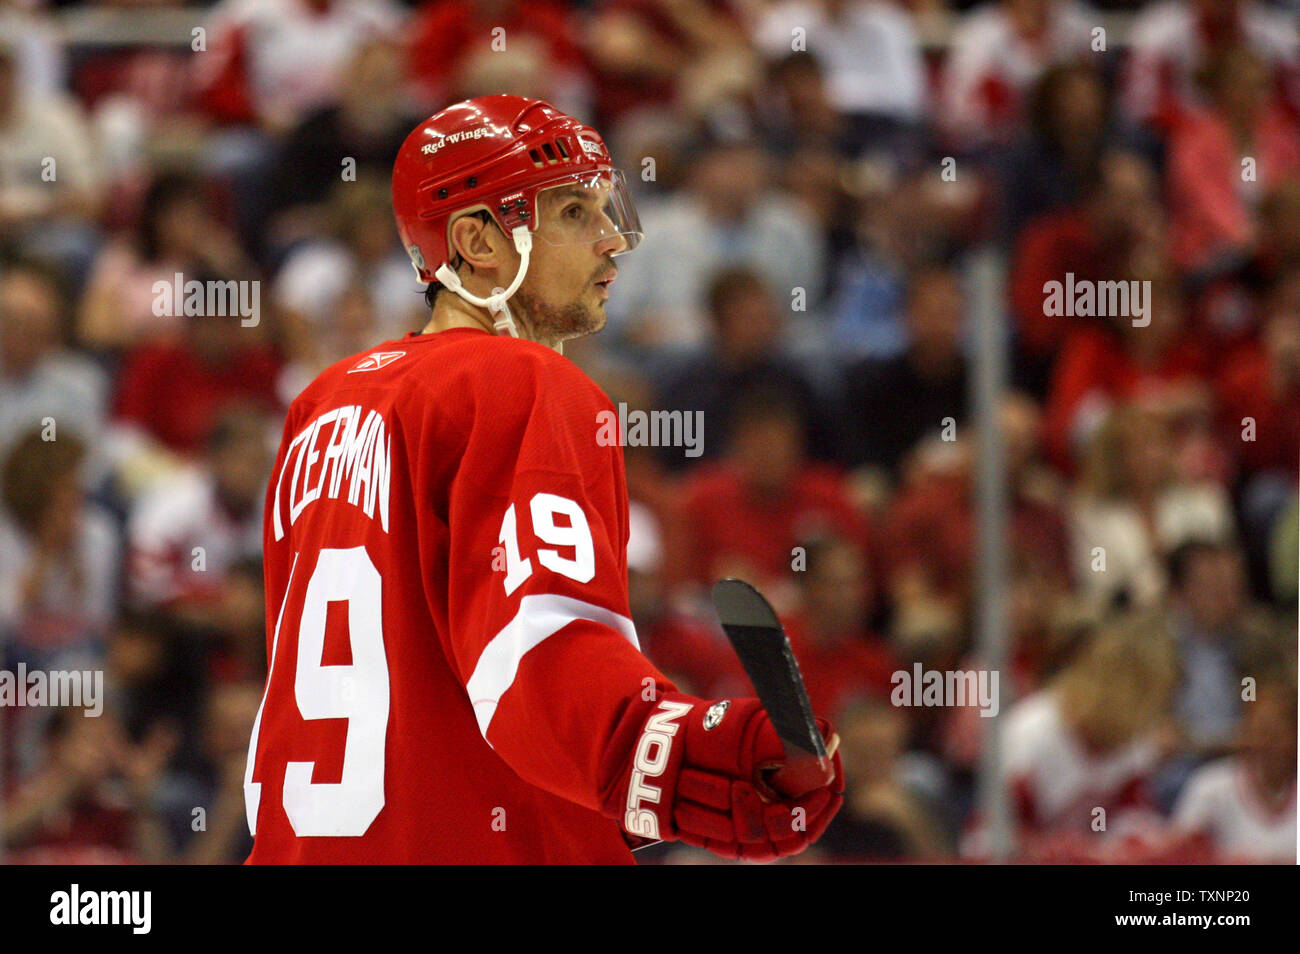 Photo gallery: Steve Yzerman in a Red Wings uniform through the years